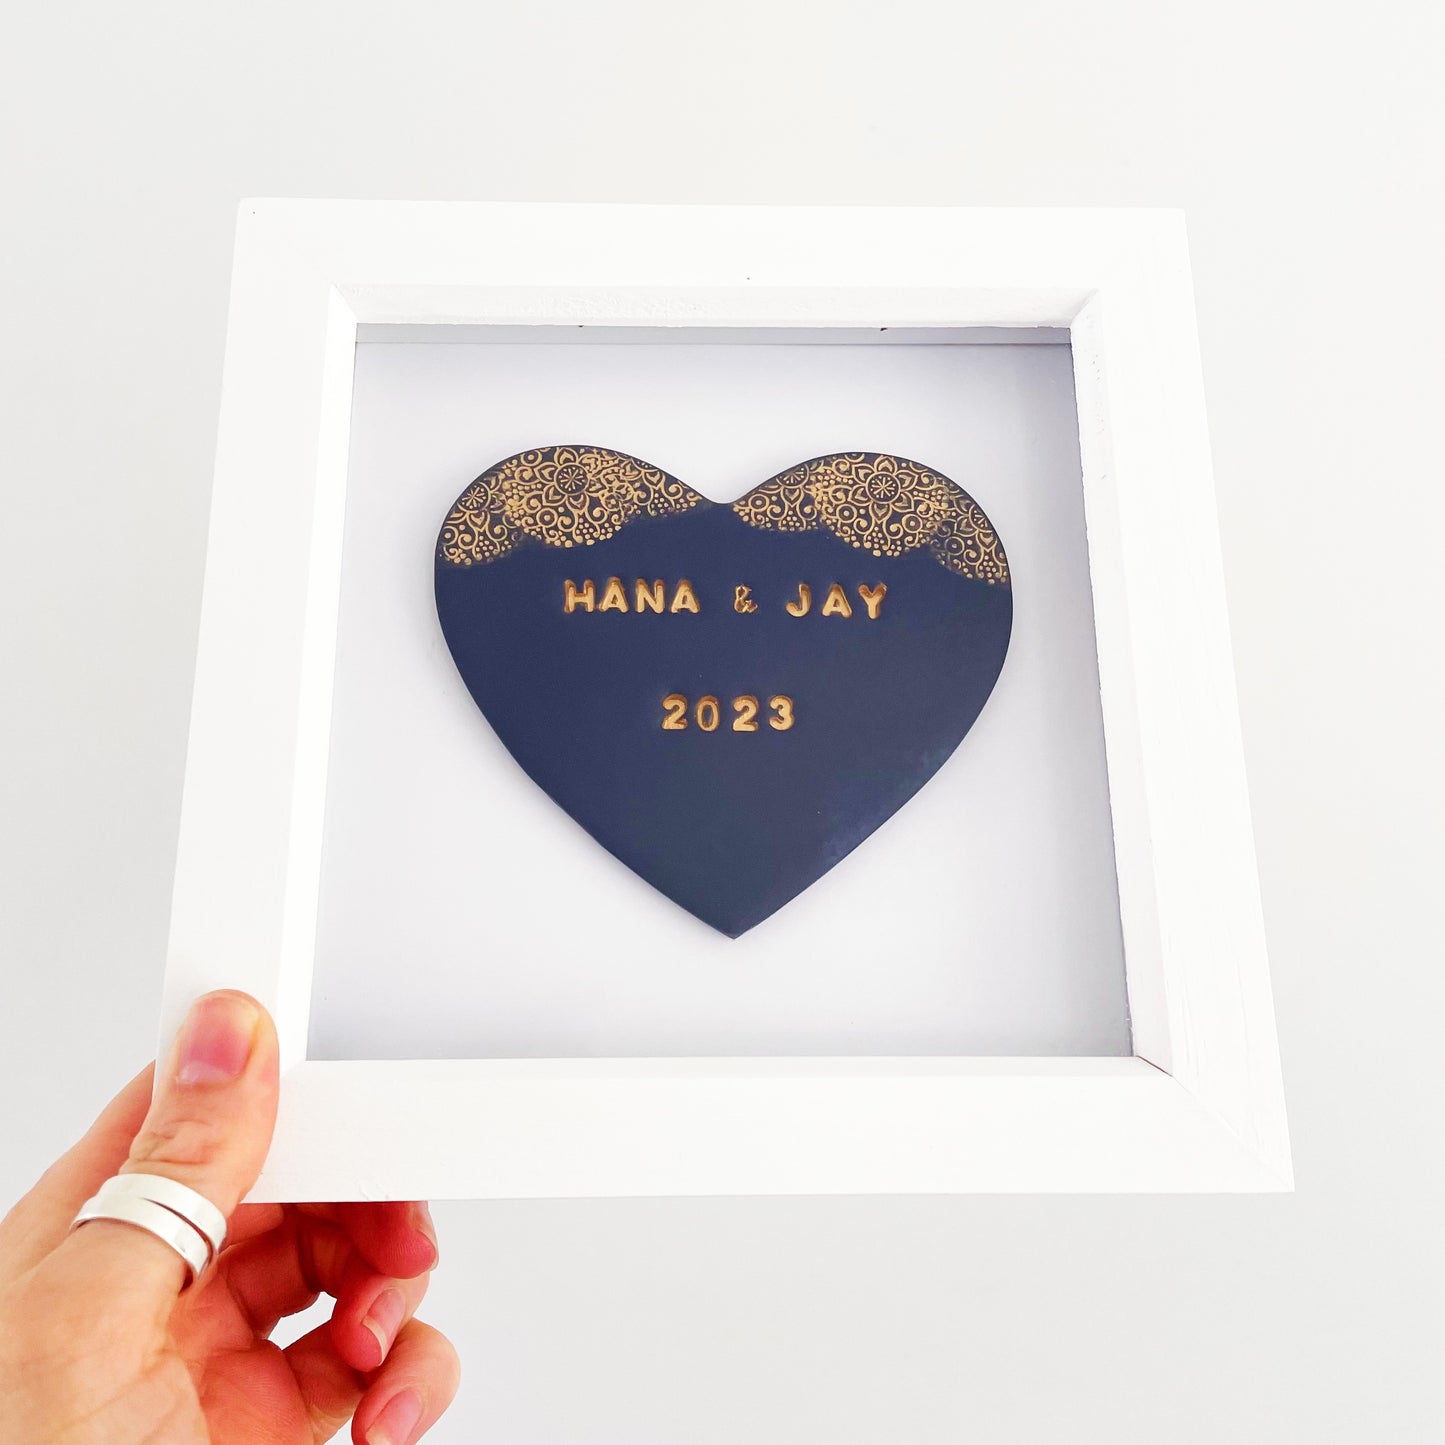 Personalised framed heart gift, dark blue clay heart with a gold lace edge at the top of the heart in a white box frame, the heart is personalised with HANA & JAY 2023